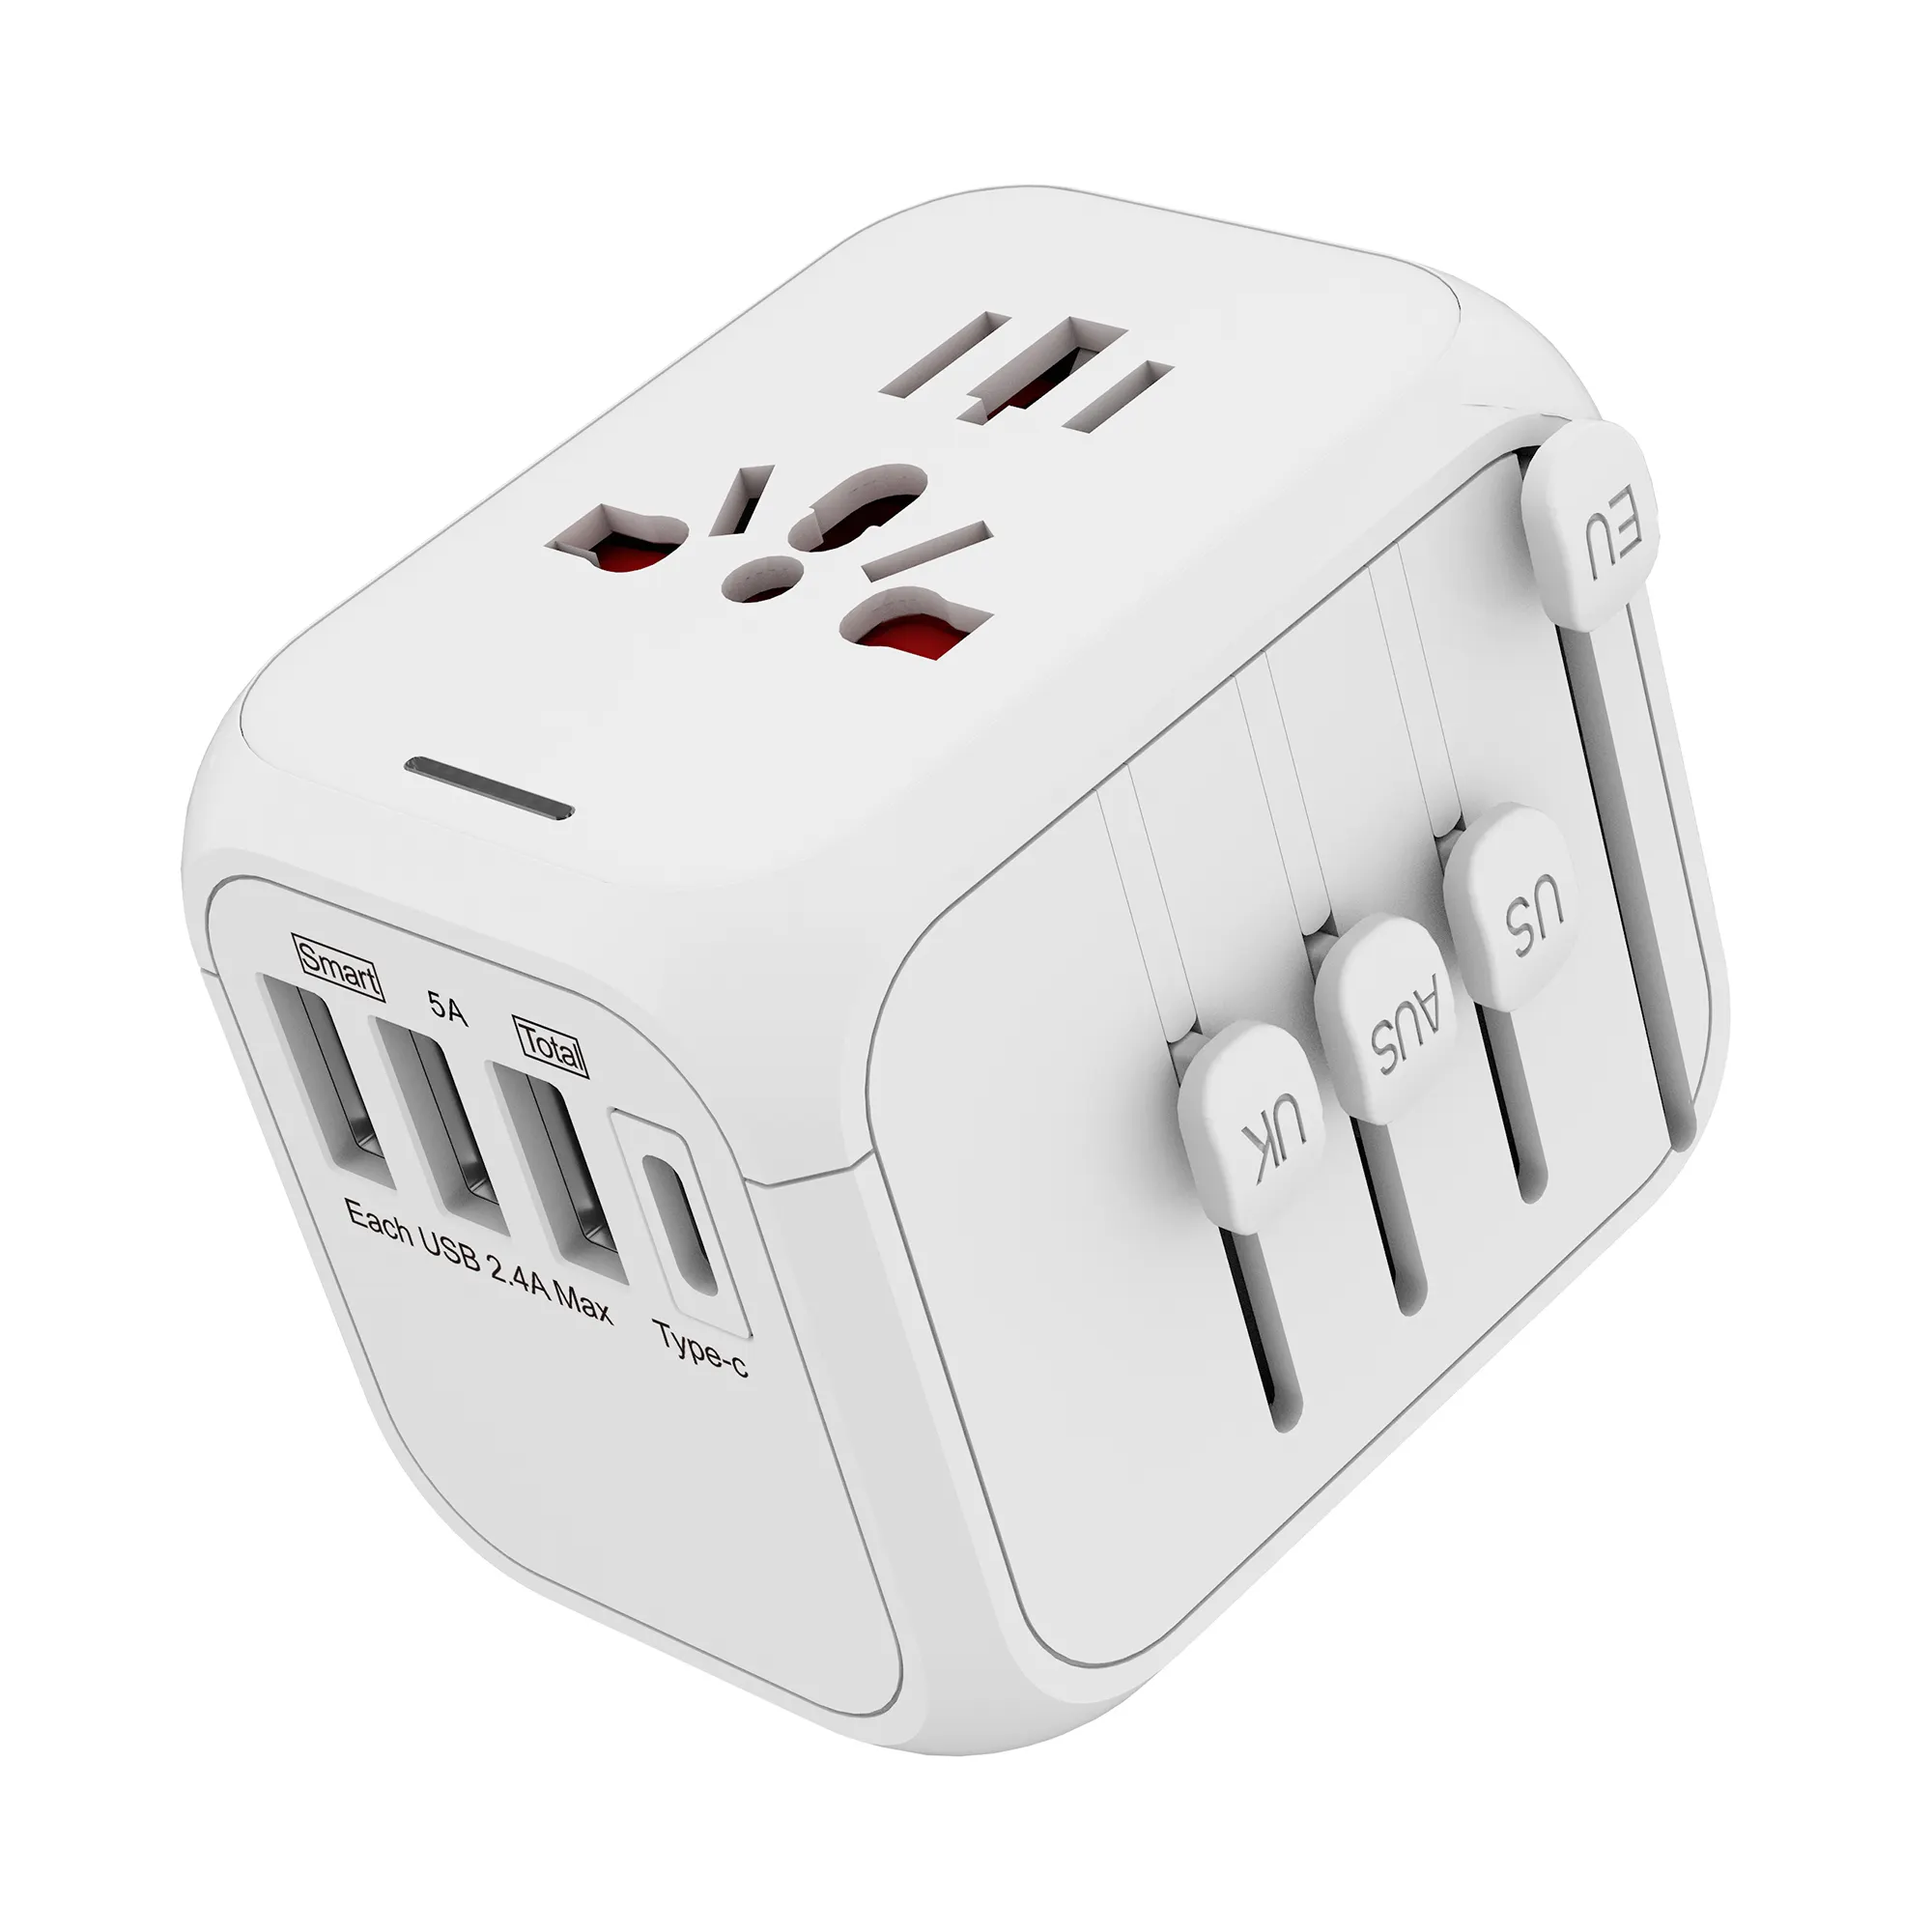 All in one world international travel adapter universal travel adapter fast charger 5V 5A